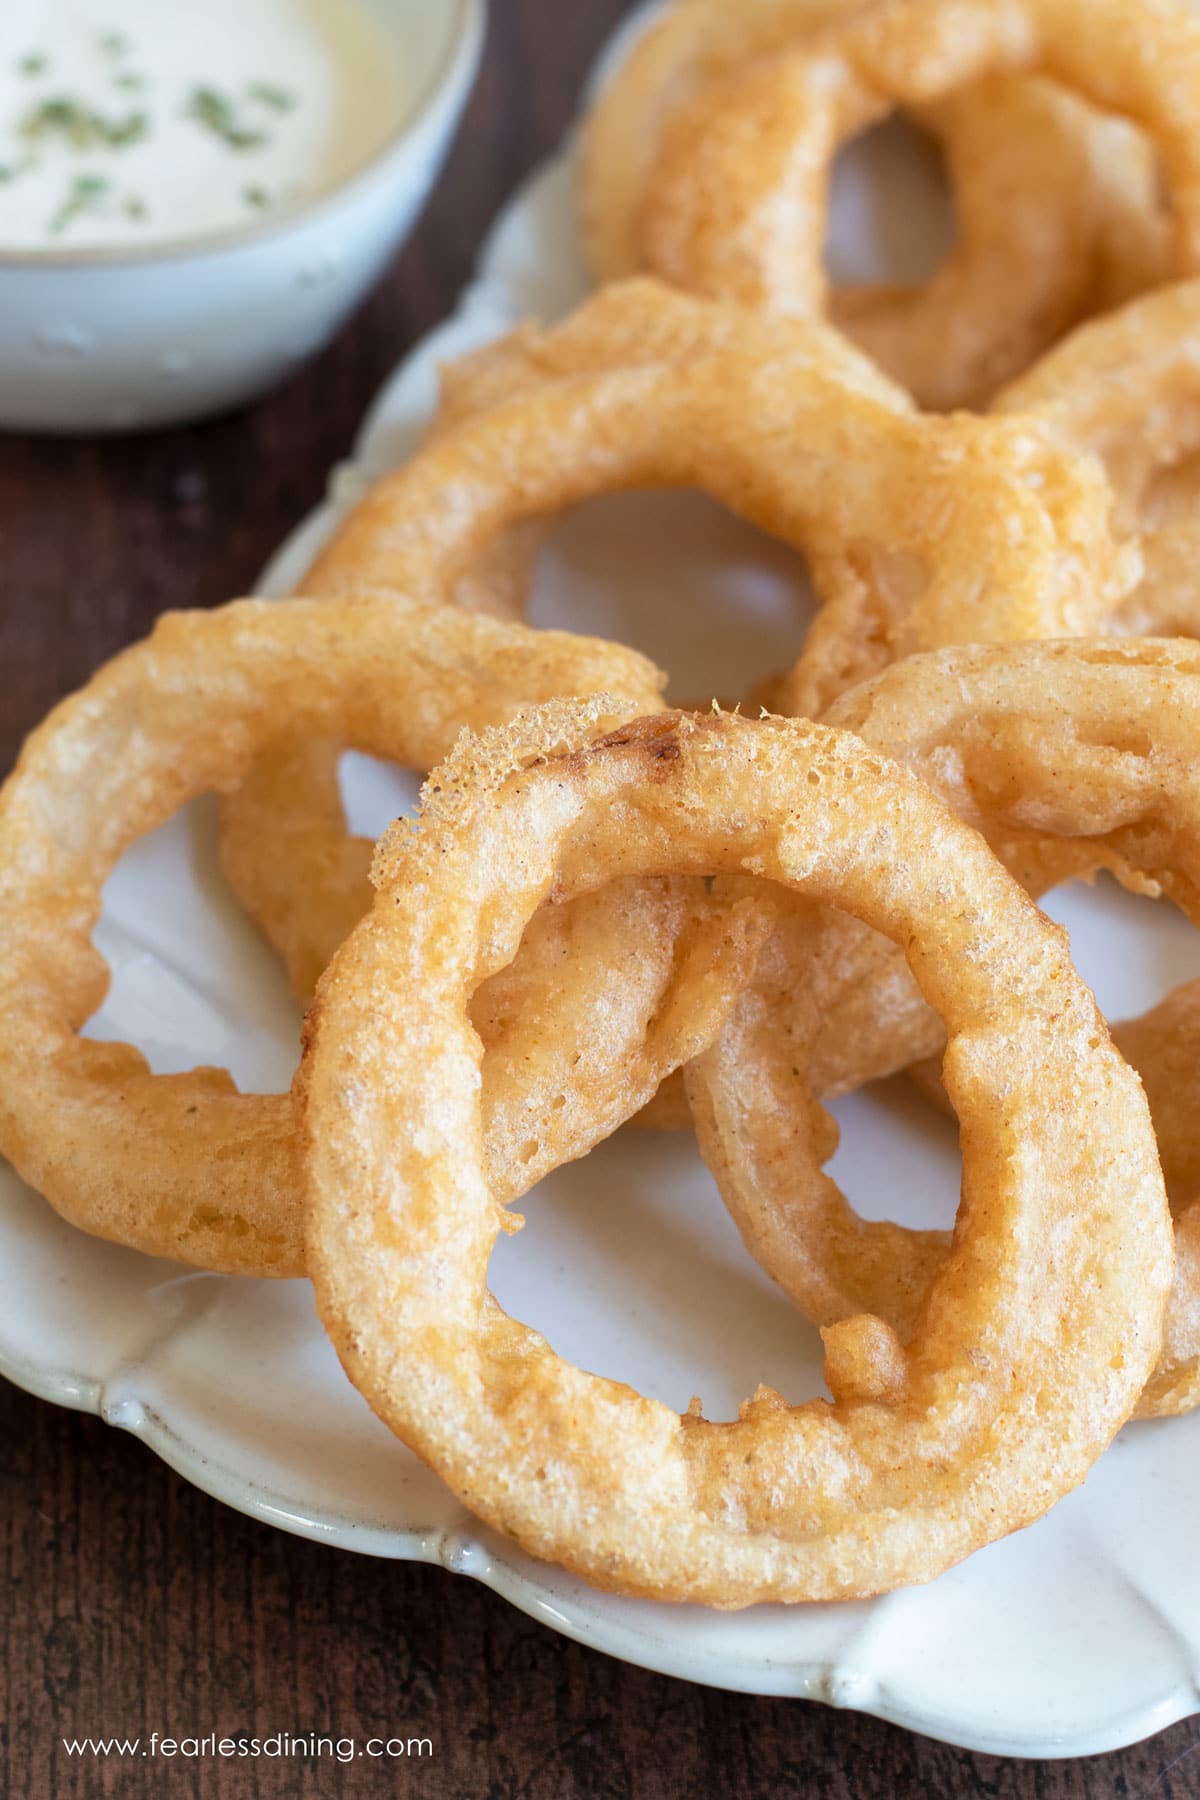 Gluten free beer battered onion rings on a platter.